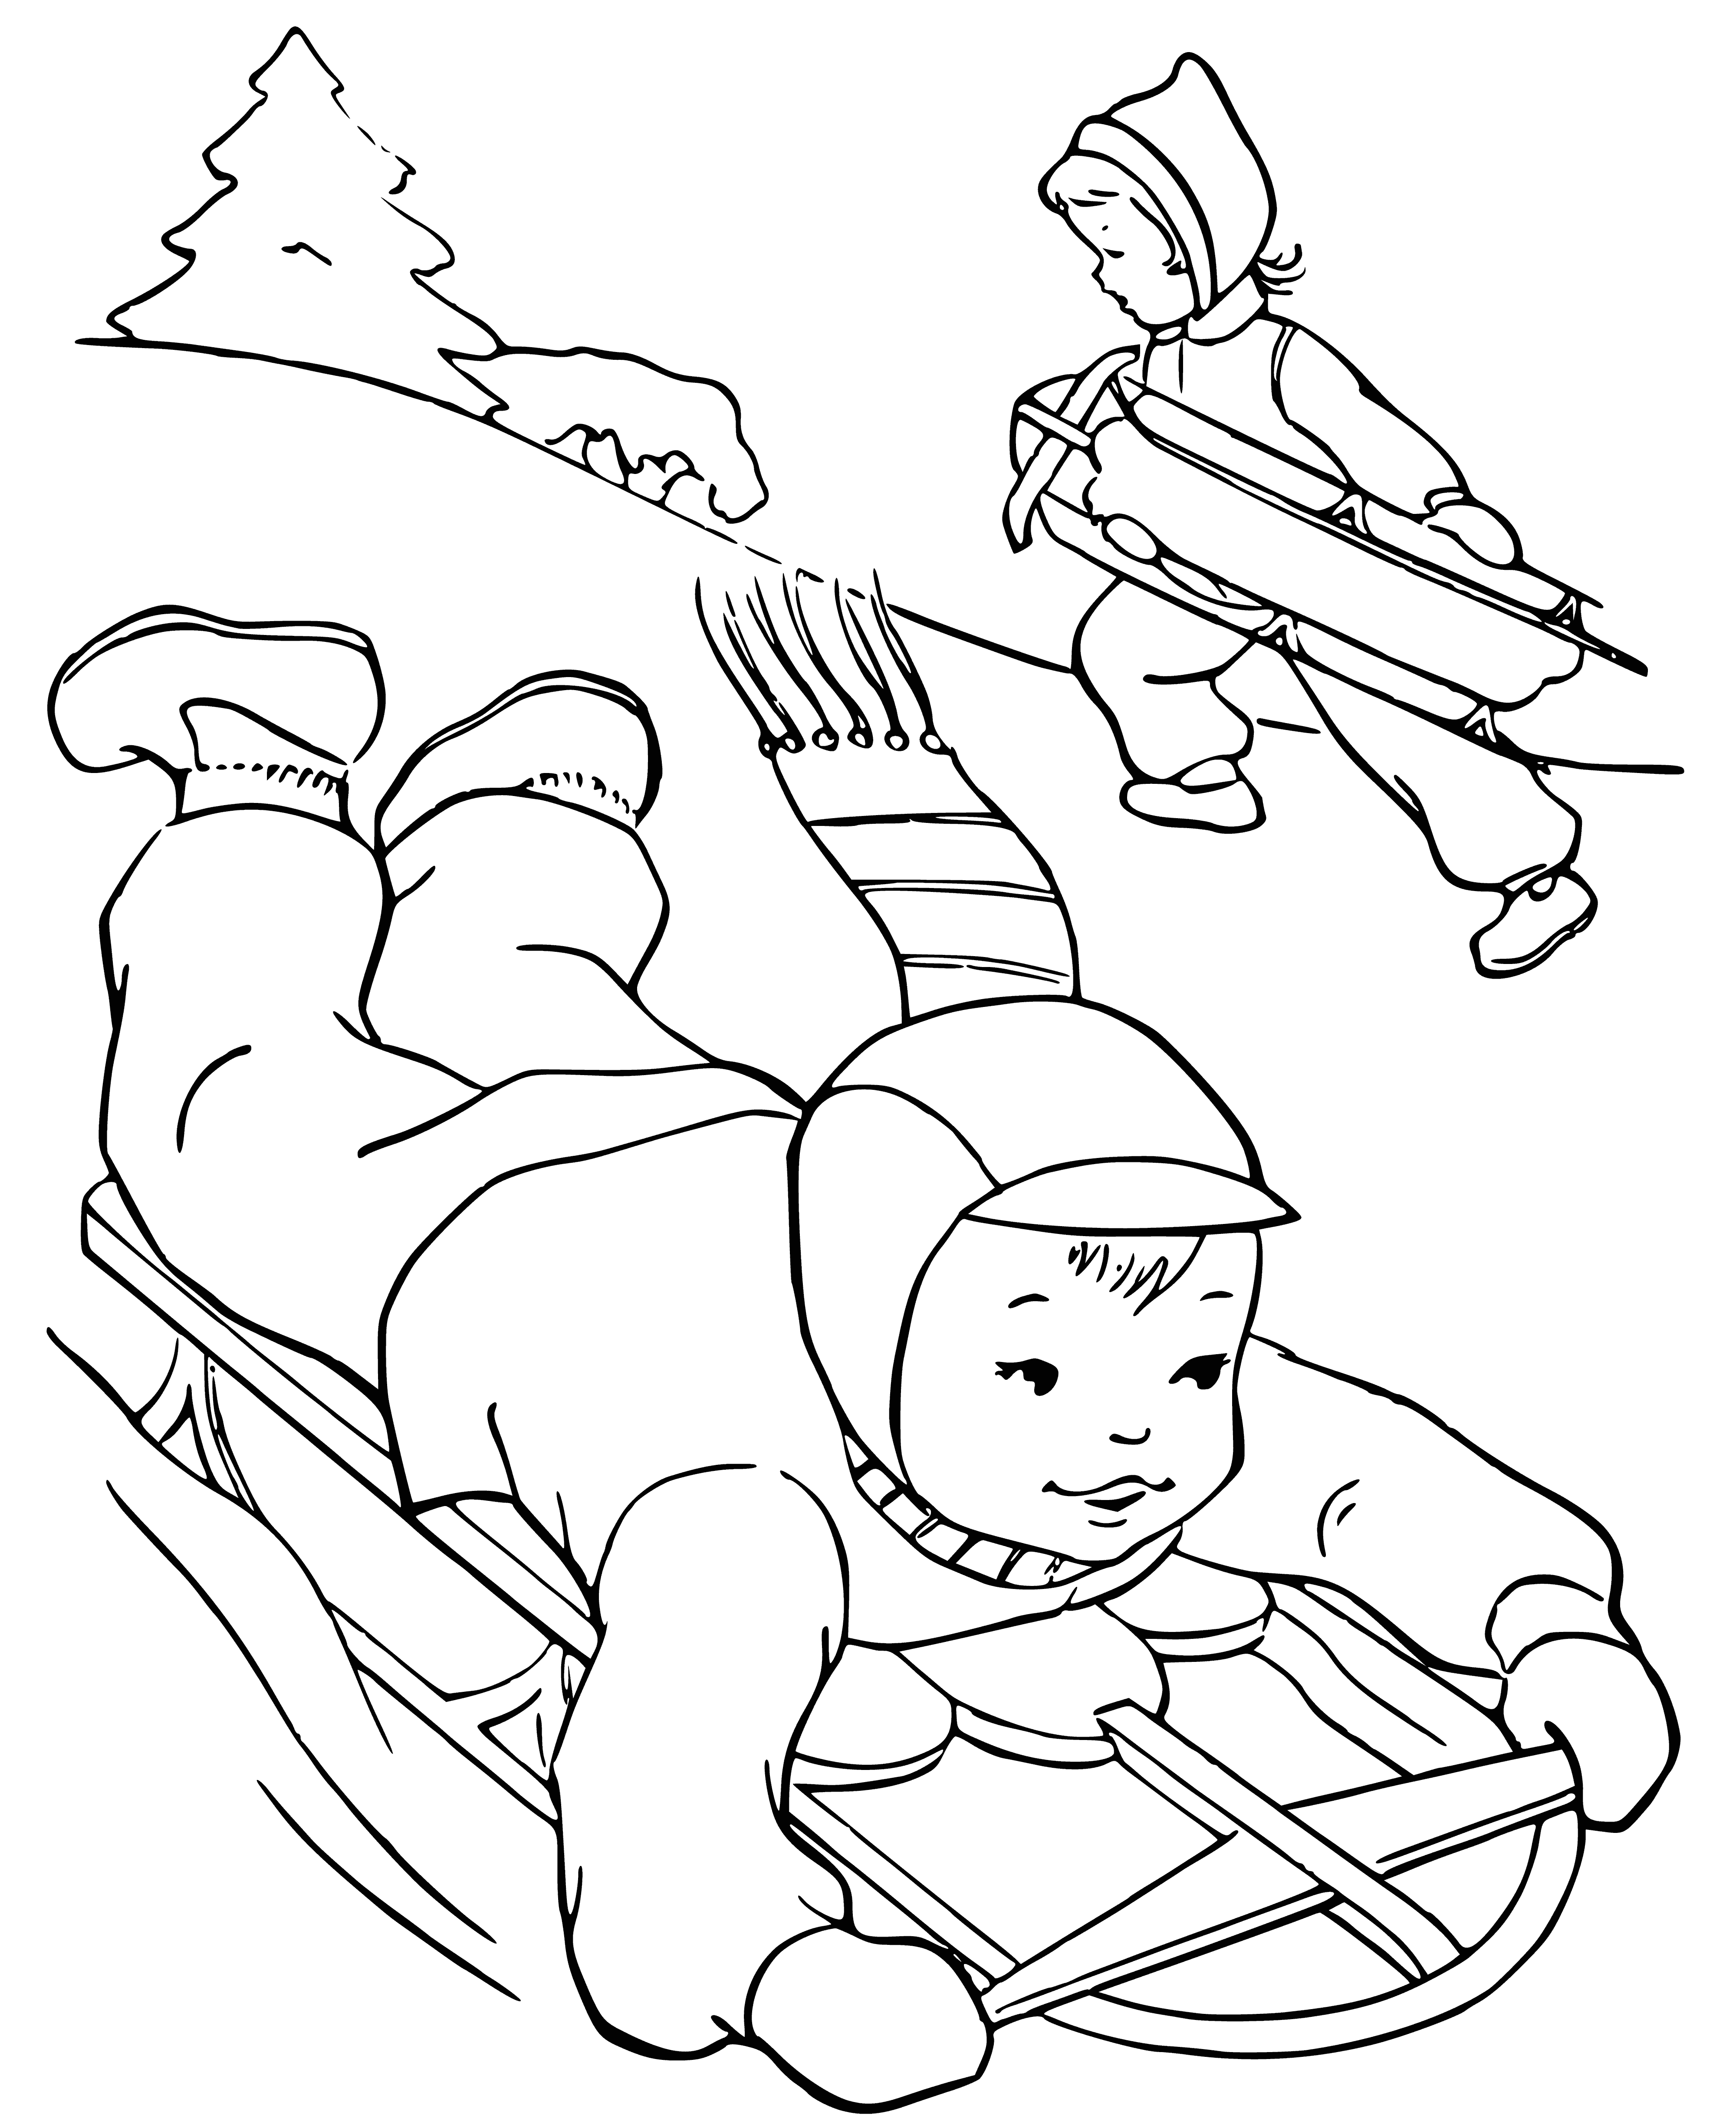 coloring page: Toddler on sled pulled by dog, waving happily with white, probably snowy, background.